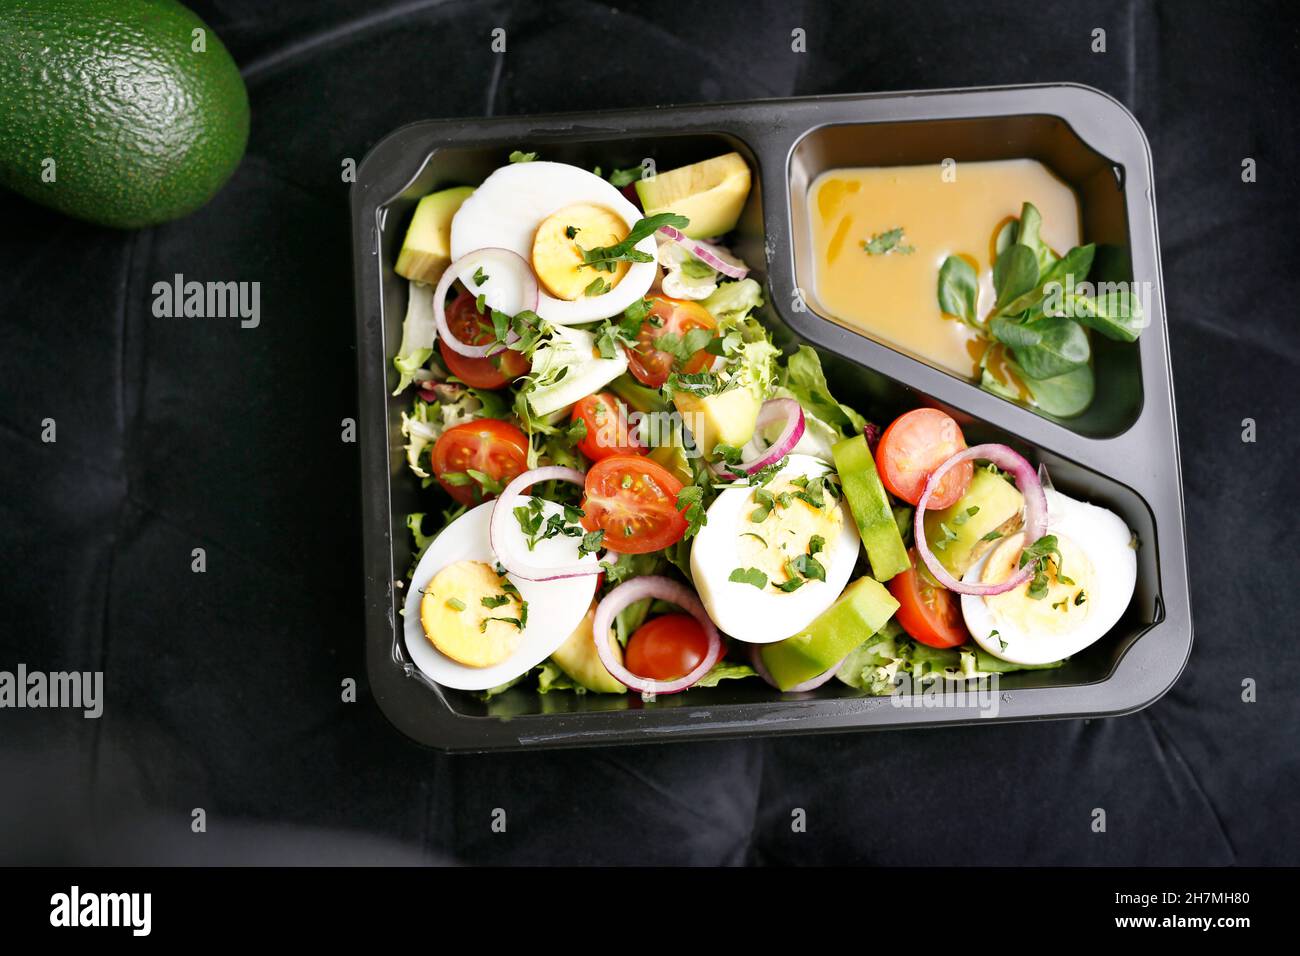 Diet box with egg and avocado salad, appetizing take-away meal. Appetizing ready-to-go dish served in a disposable box. Culinary photography.y photog Stock Photo